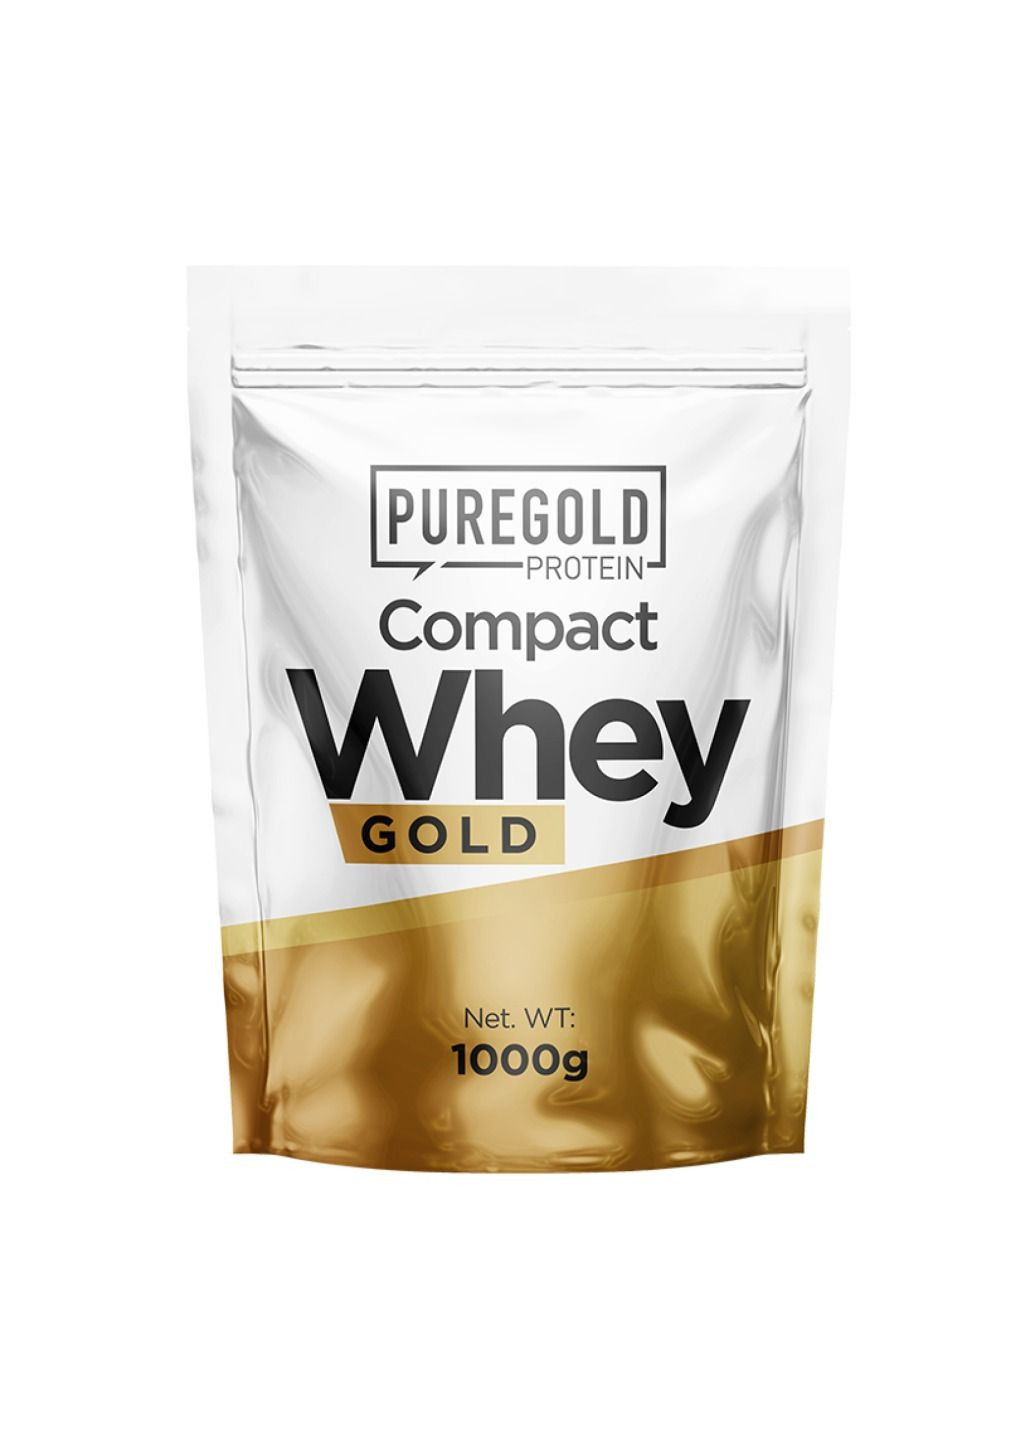 Протеин Compact Whey Gold - 1000g Blueberry Chiskake Pure Gold Protein (280932755)